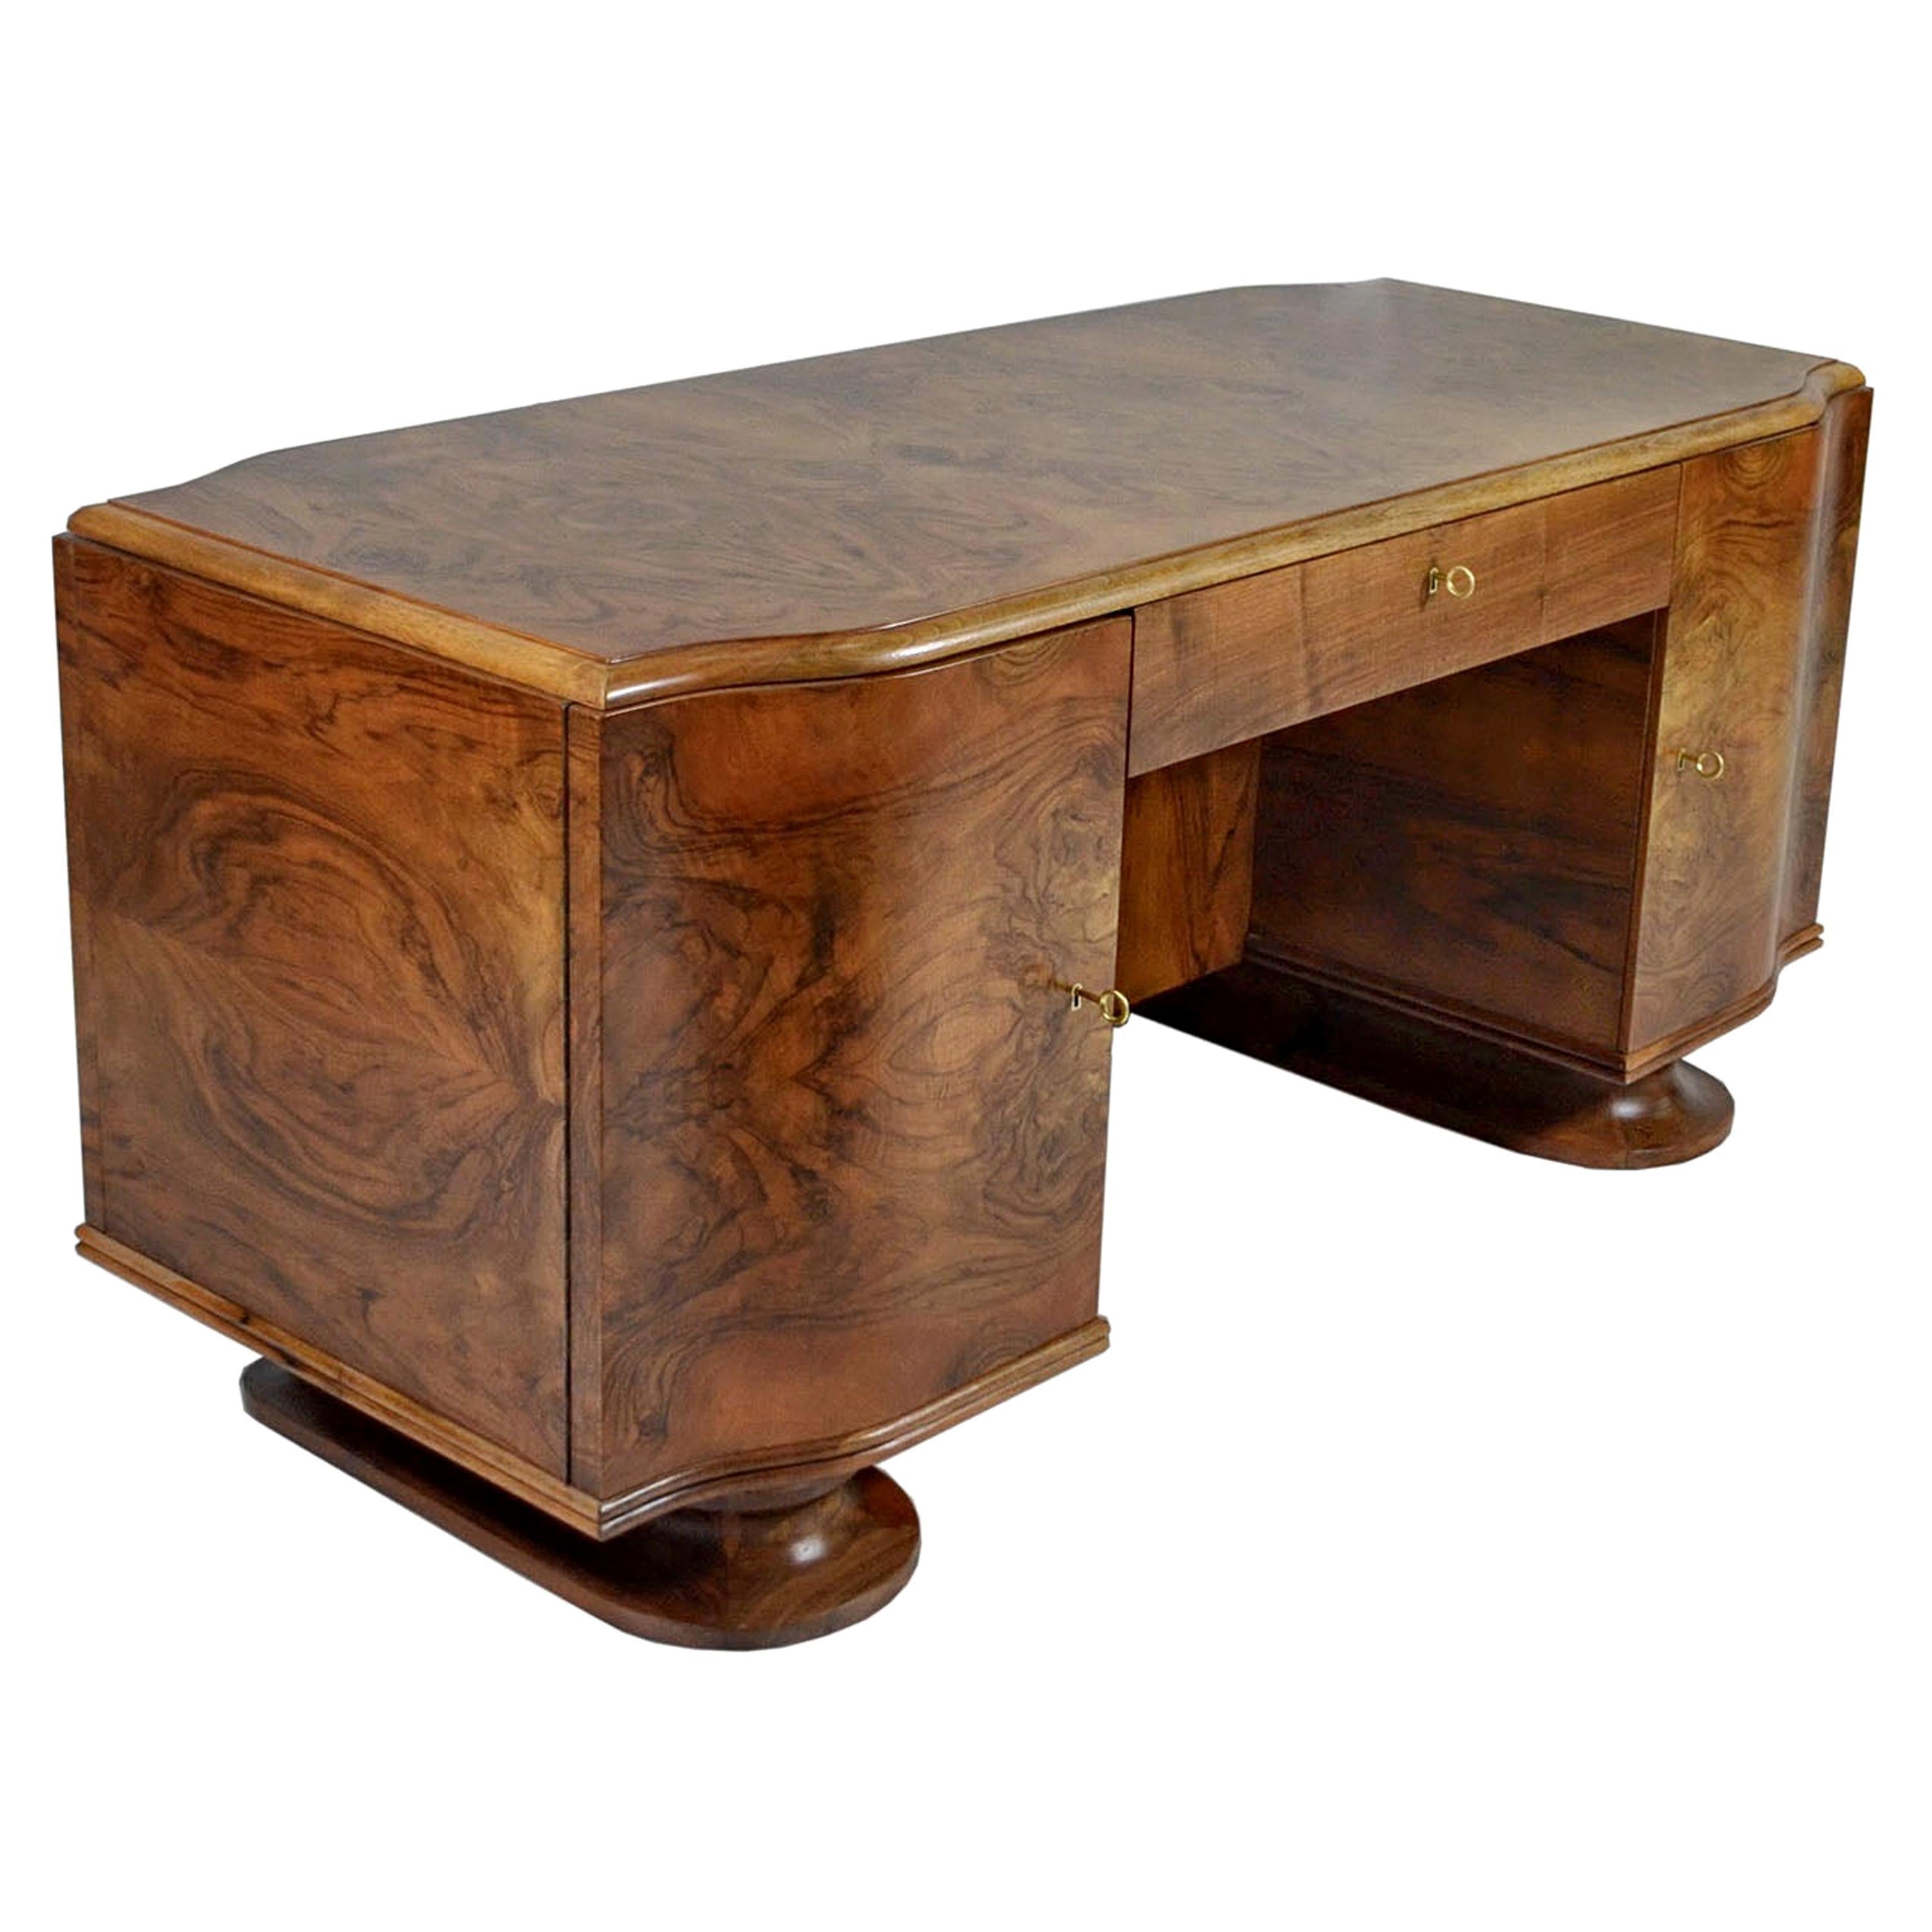 Exceptional Art Deco Desk in French Walnut and Mahogany